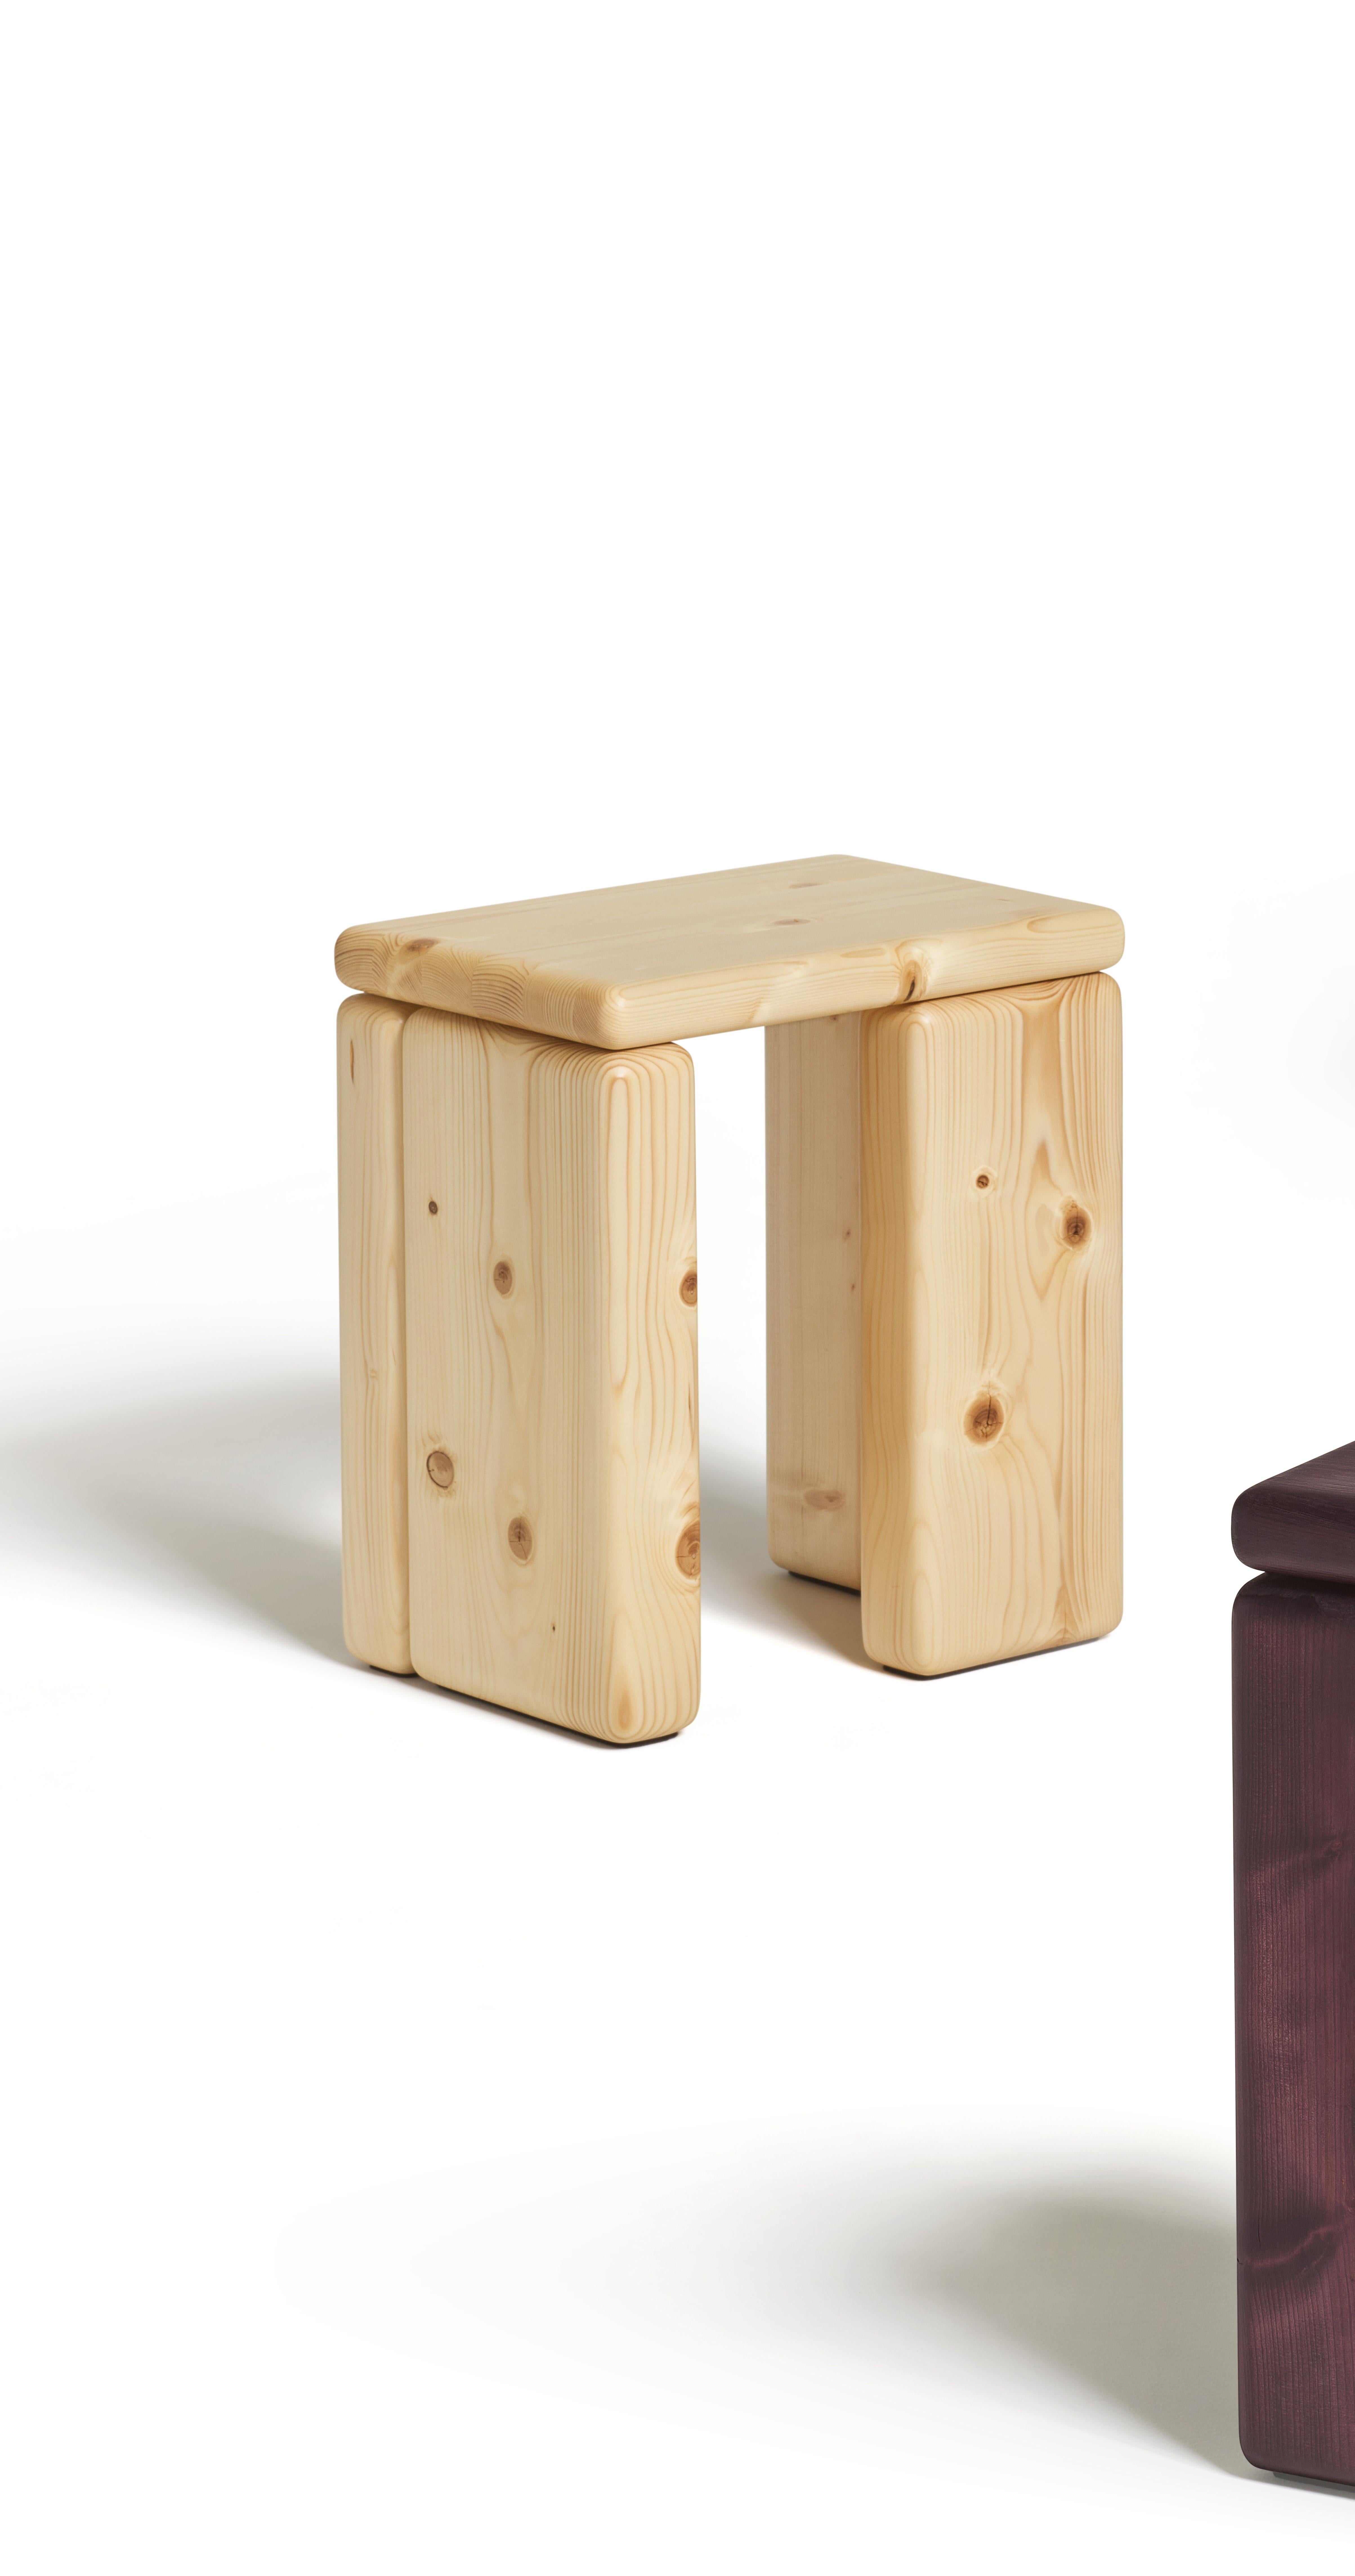 Timber stool uncolored wood by Onno Adriaanse
Signed and numbered
Dimensions: D 40x W 29 x H 45 cm
Materials: Stained pine wood, clear satin coating
Also available in Color: Indigo blue, purple-red, uncolored wood. More colors on request. 

By